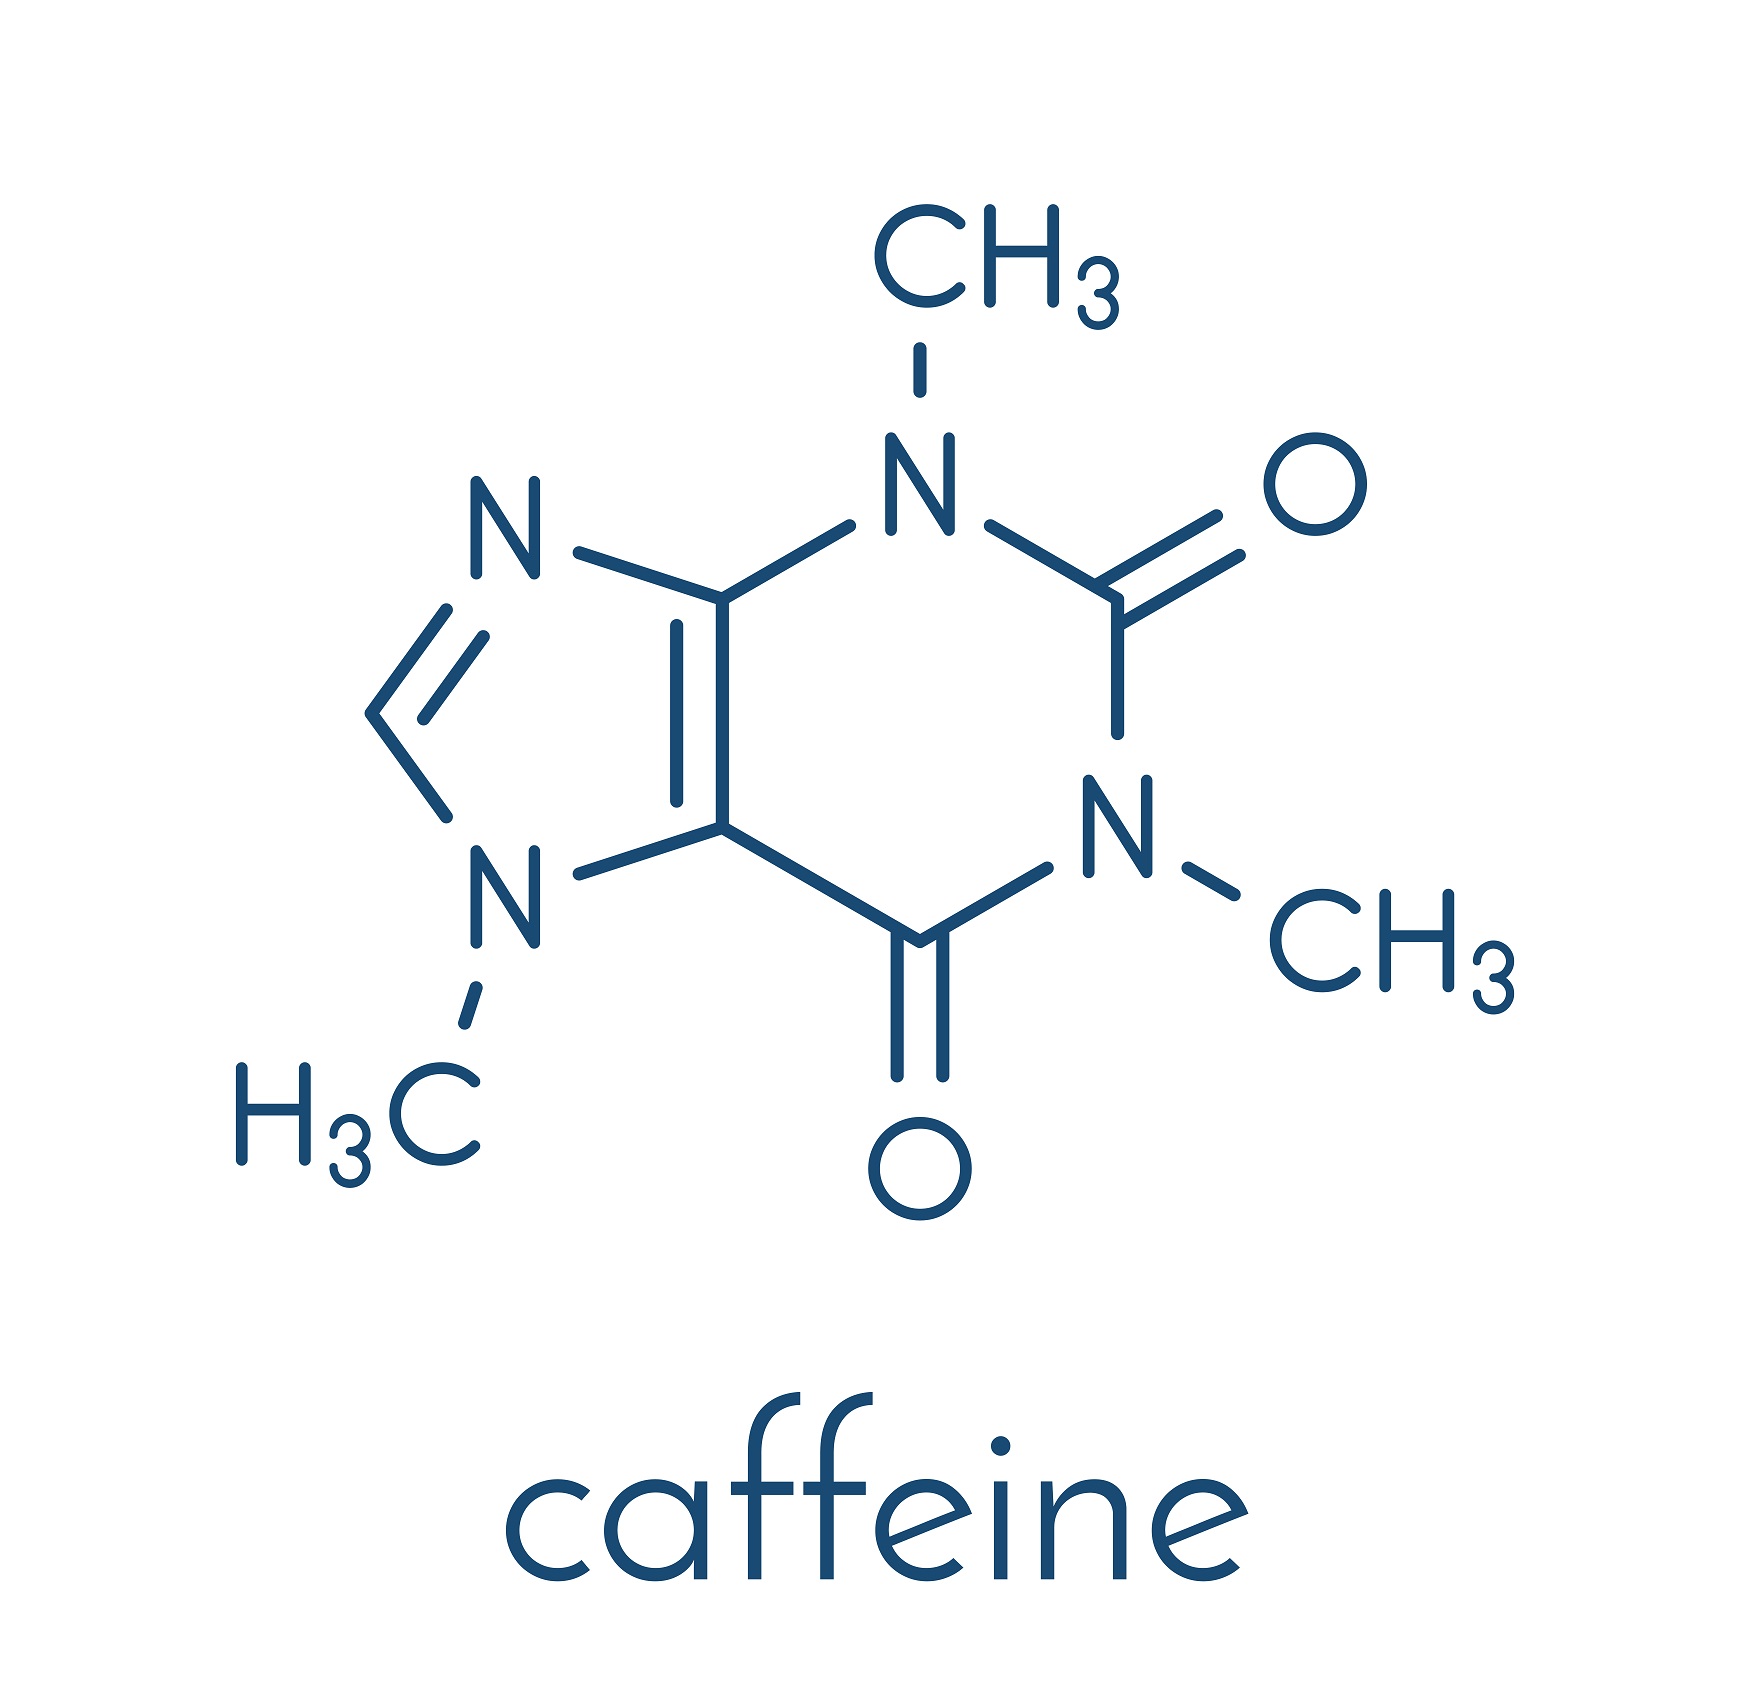 Caffeine - the most known and effective stimulant, widely used by nearly everyone!